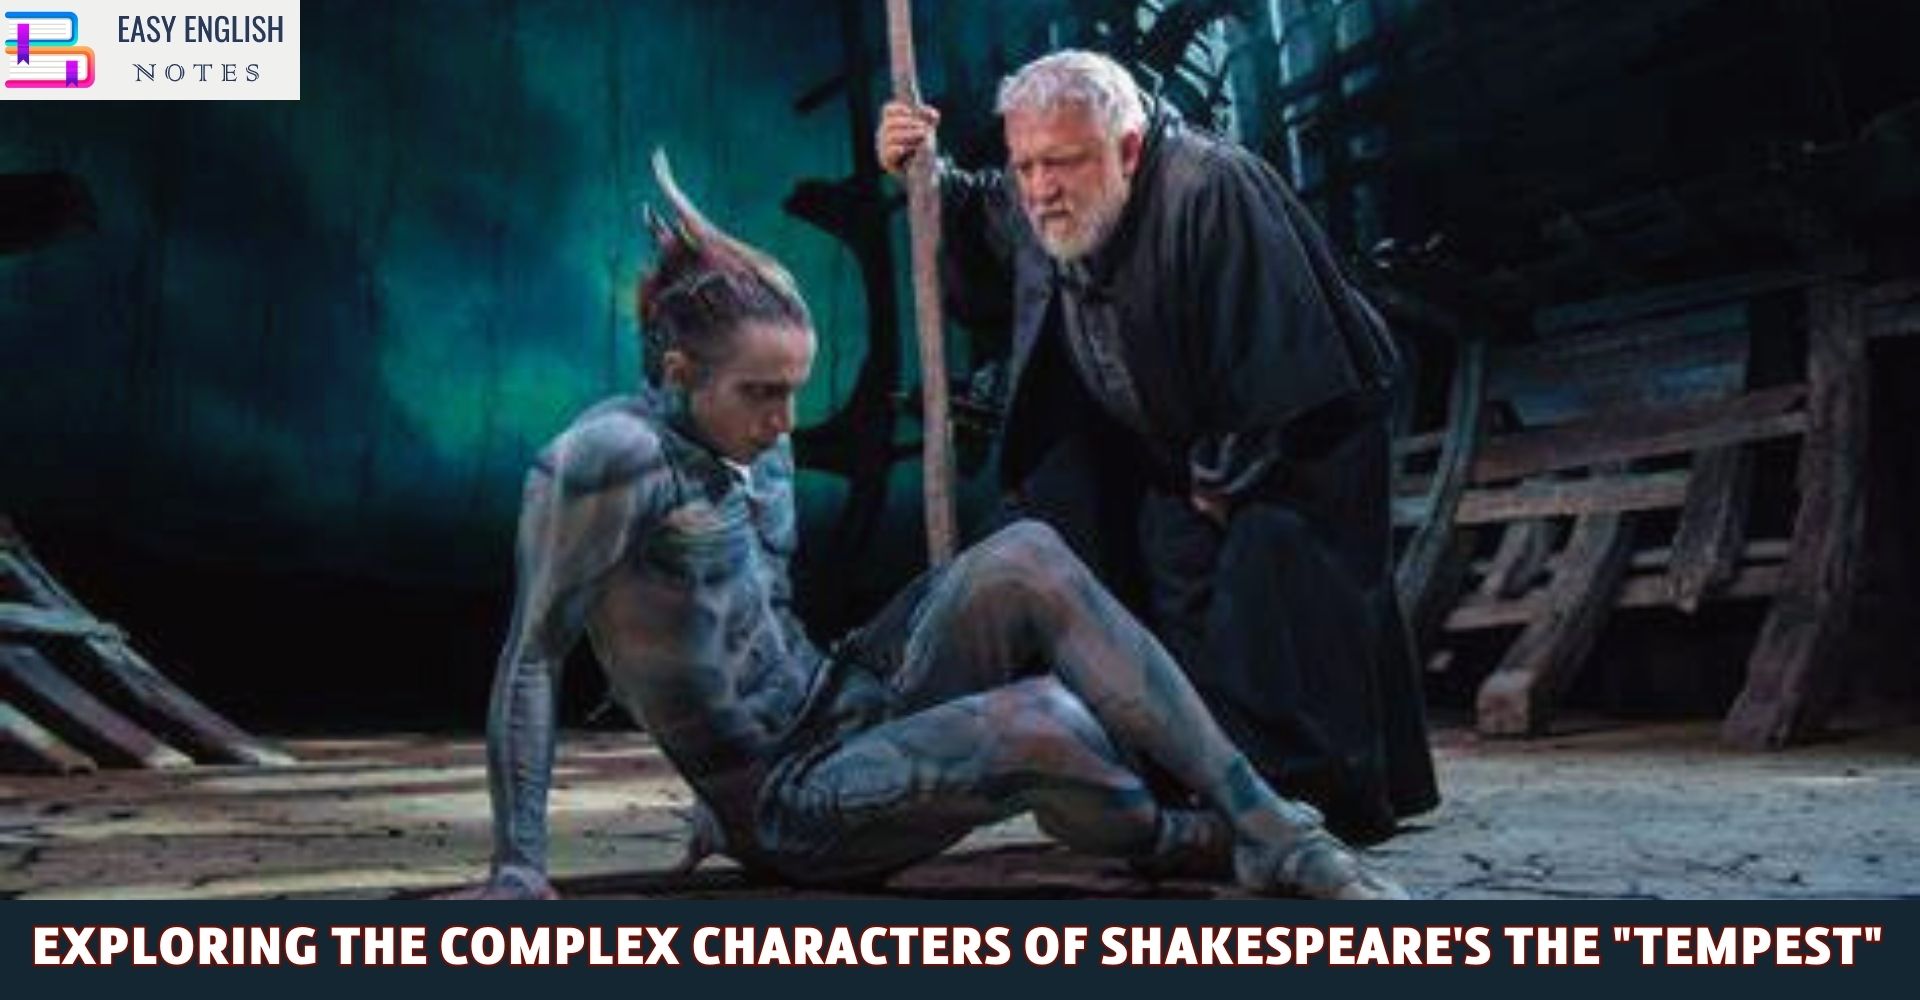 Exploring the Complex Characters of Shakespeare's The "Tempest"